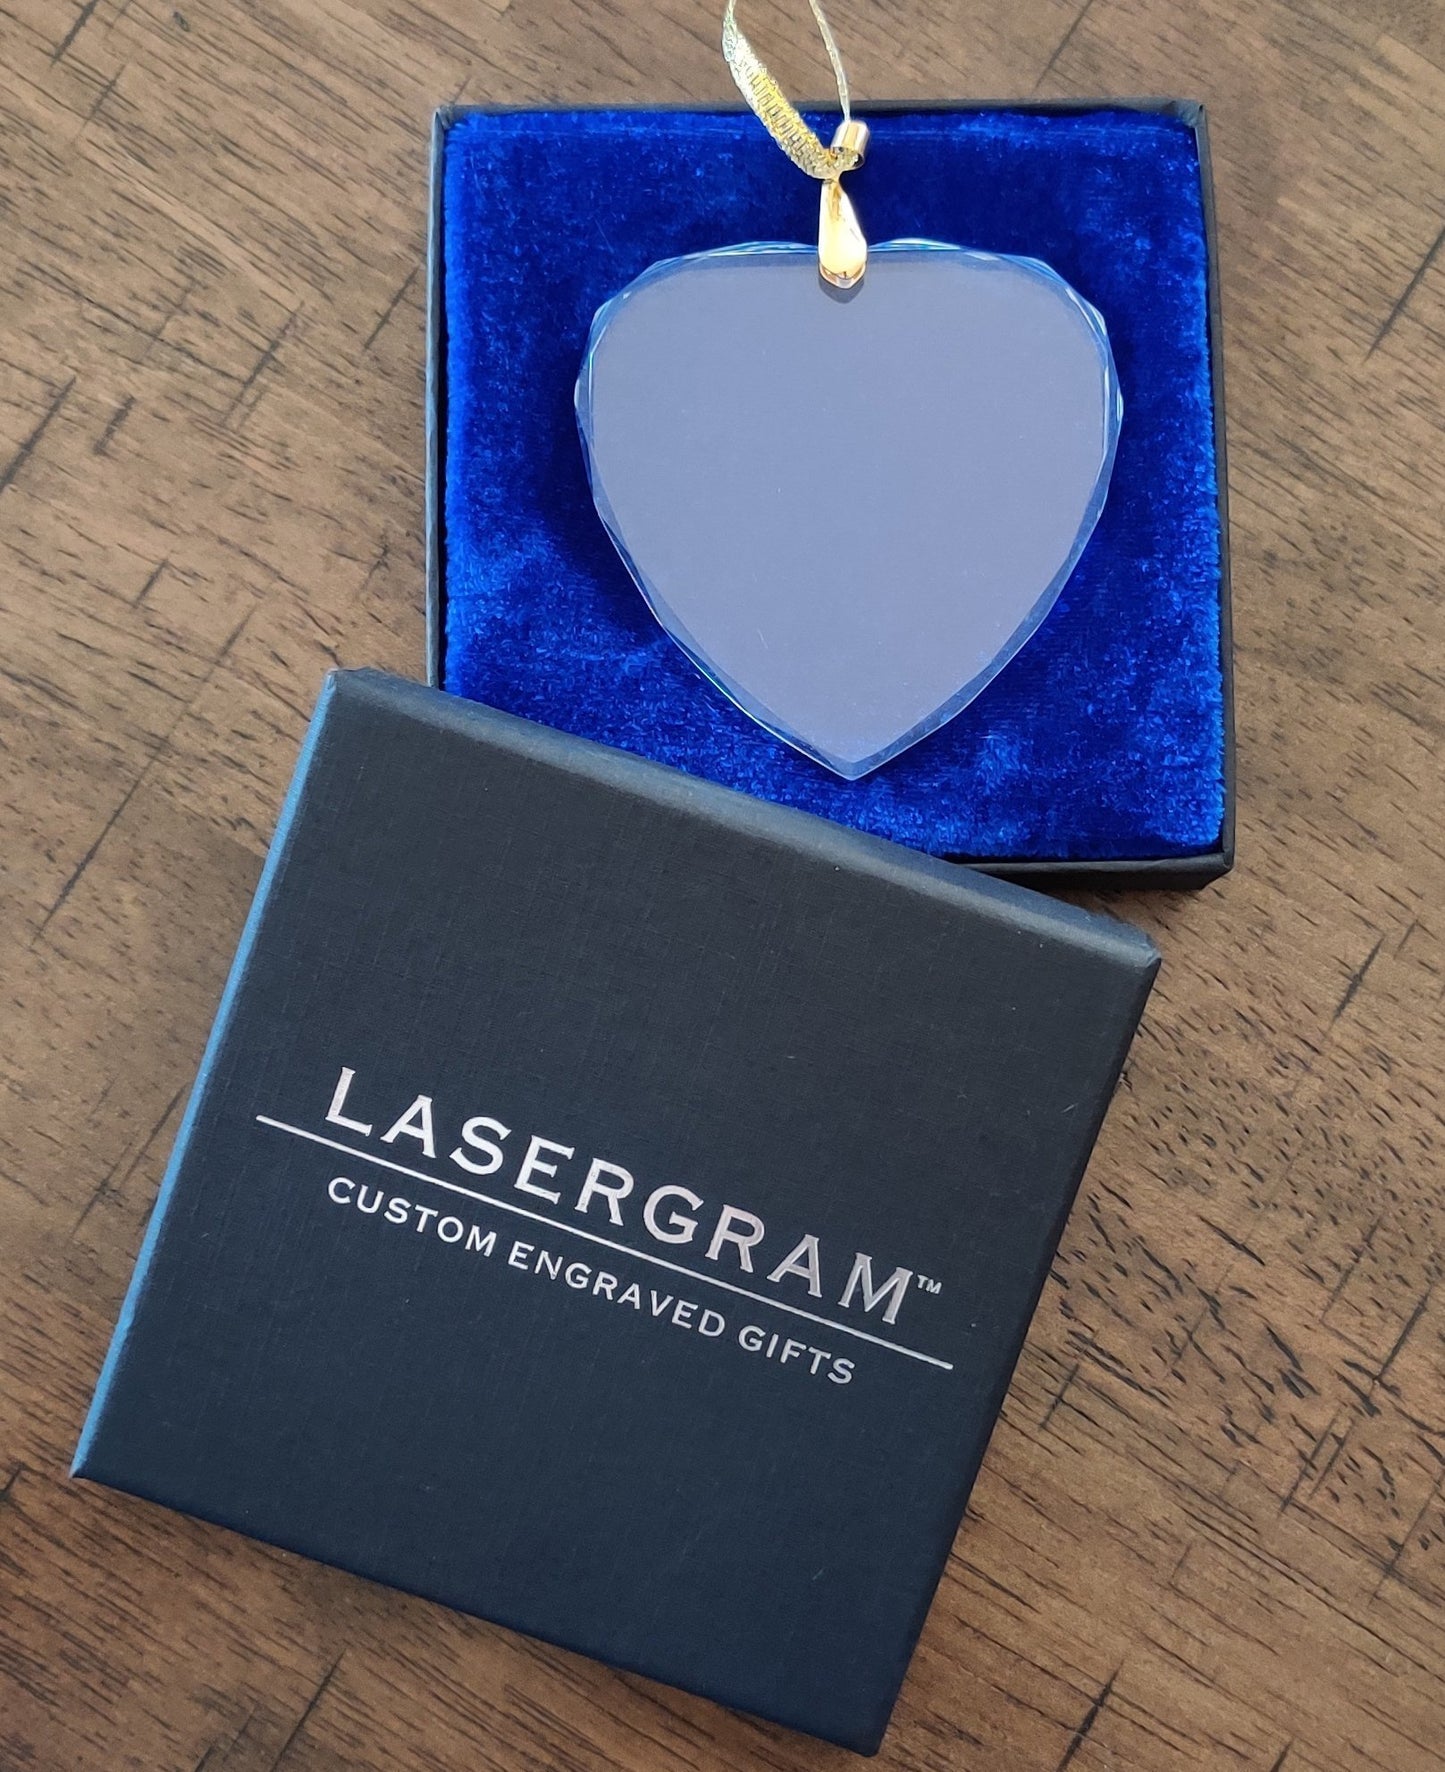 LaserGram Christmas Ornament, World's Greatest Girlfriend, Personalized Engraving Included (Heart Shape)